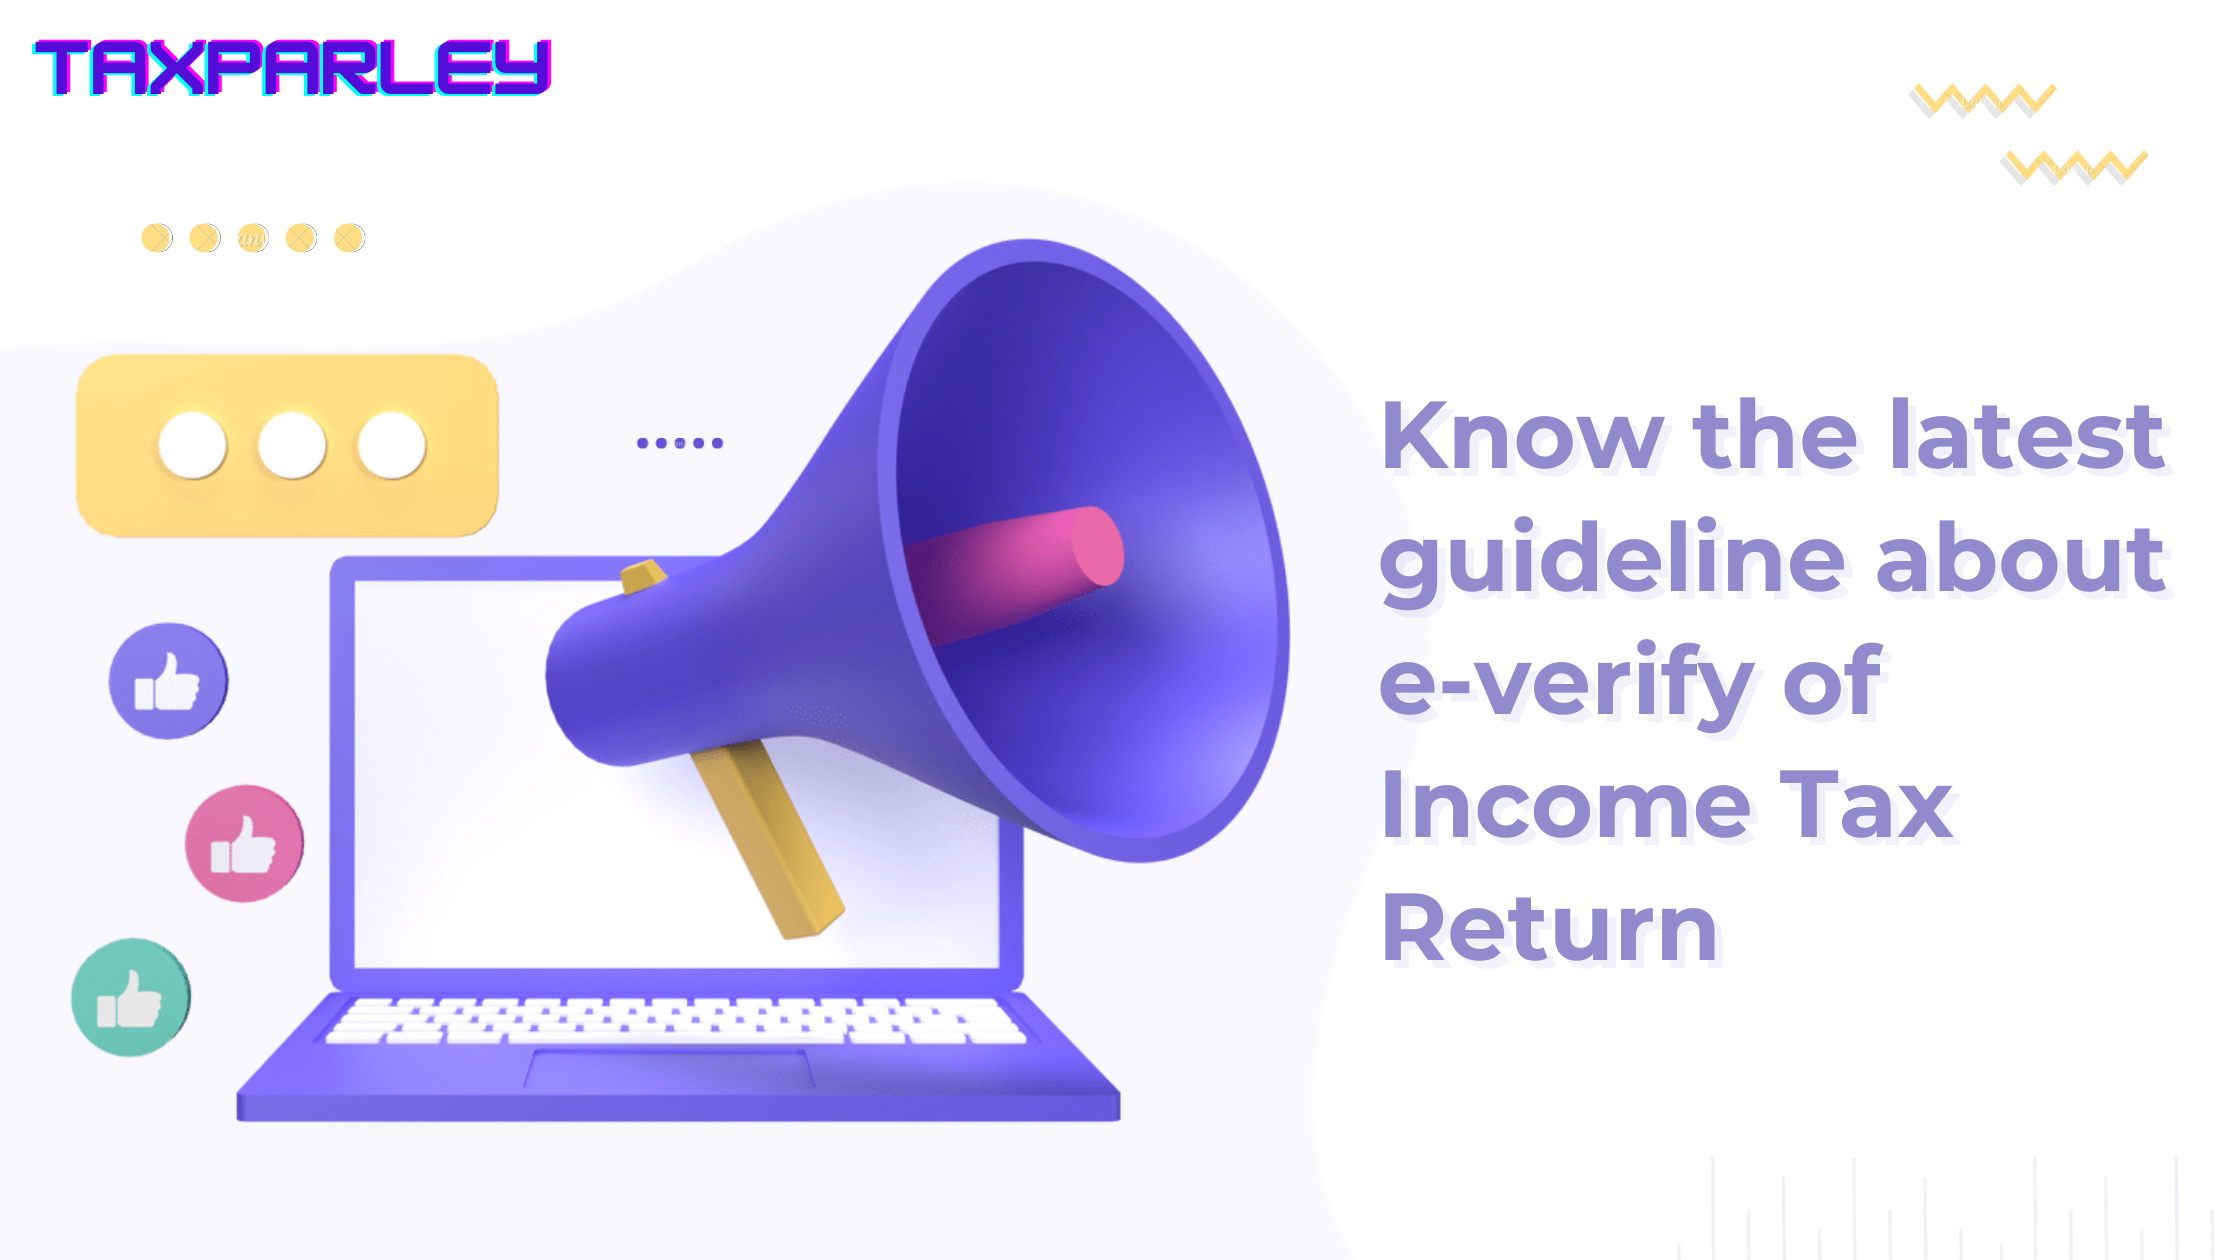 Know the latest guideline about e-verify of Income Tax Return